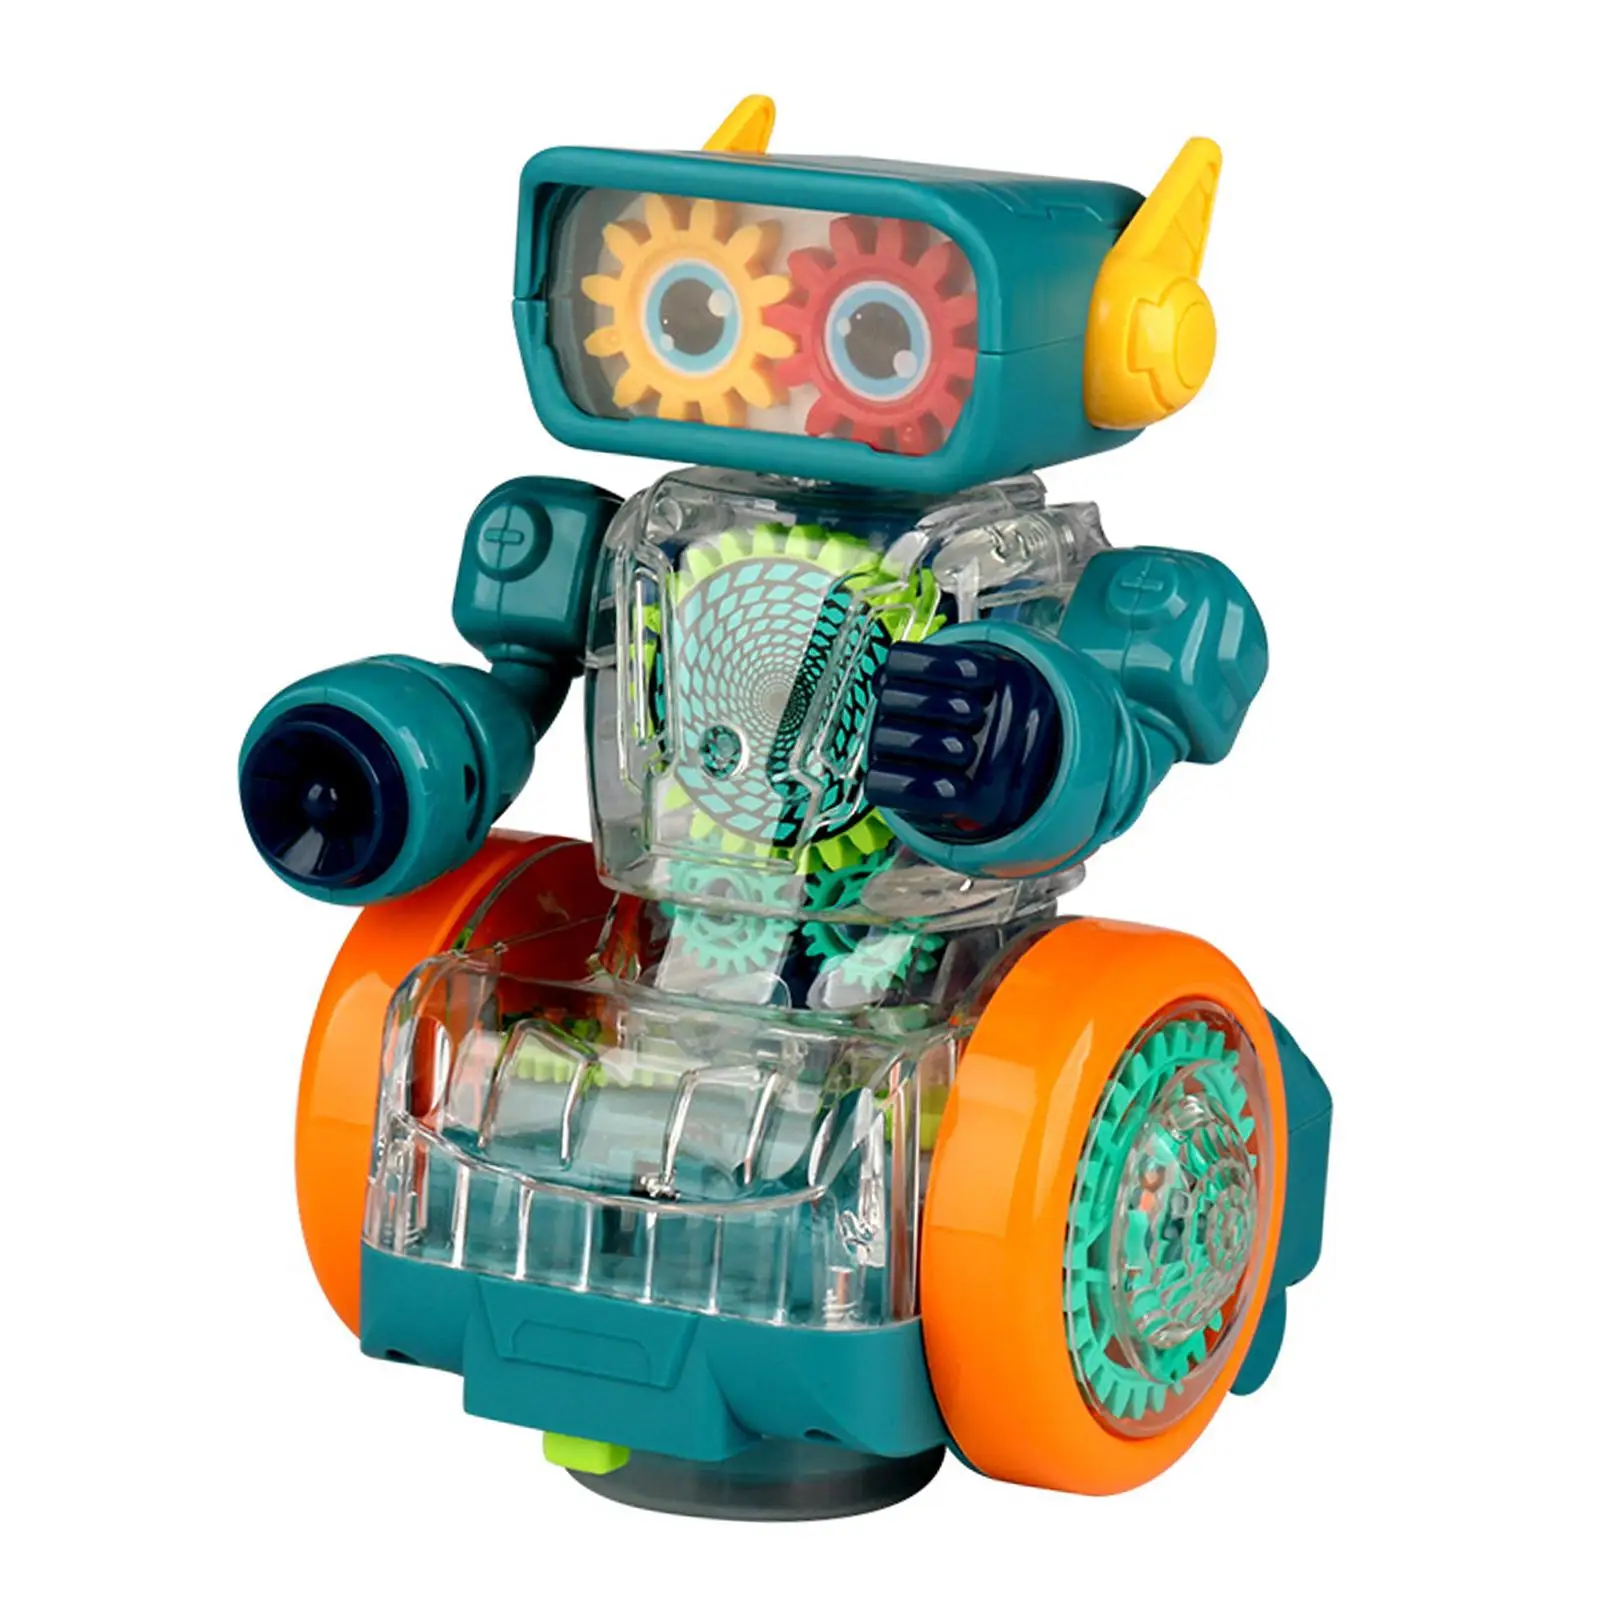 Mechanical Gear Robot Toy Interactive Toys Fine Motor Skills for Toddlers